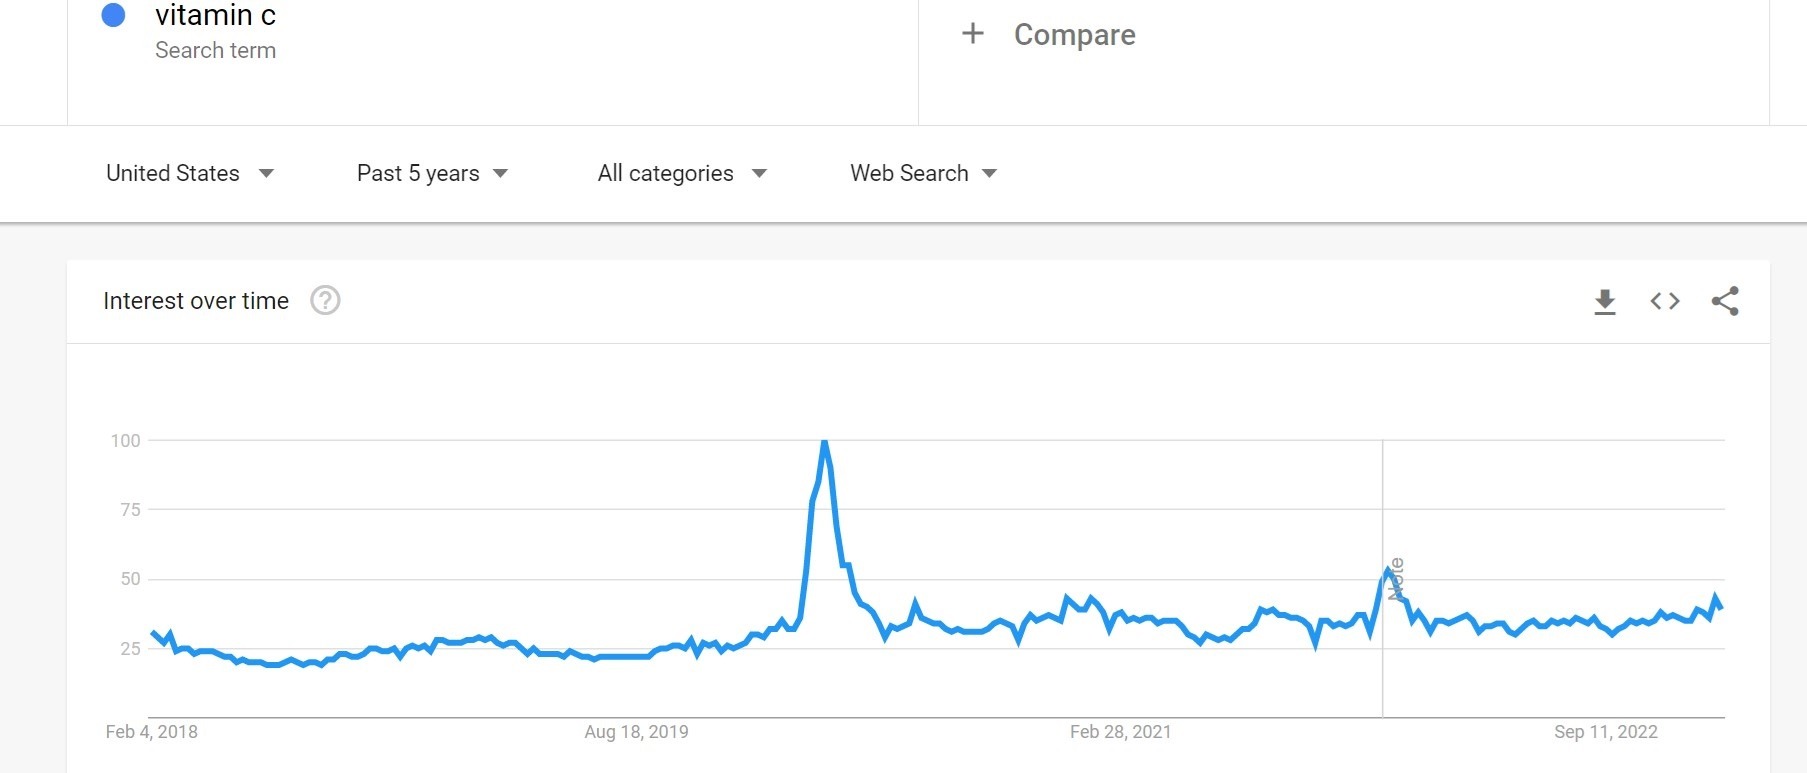 Interest in Vitamin C as a Search Term from 2017 till 2022